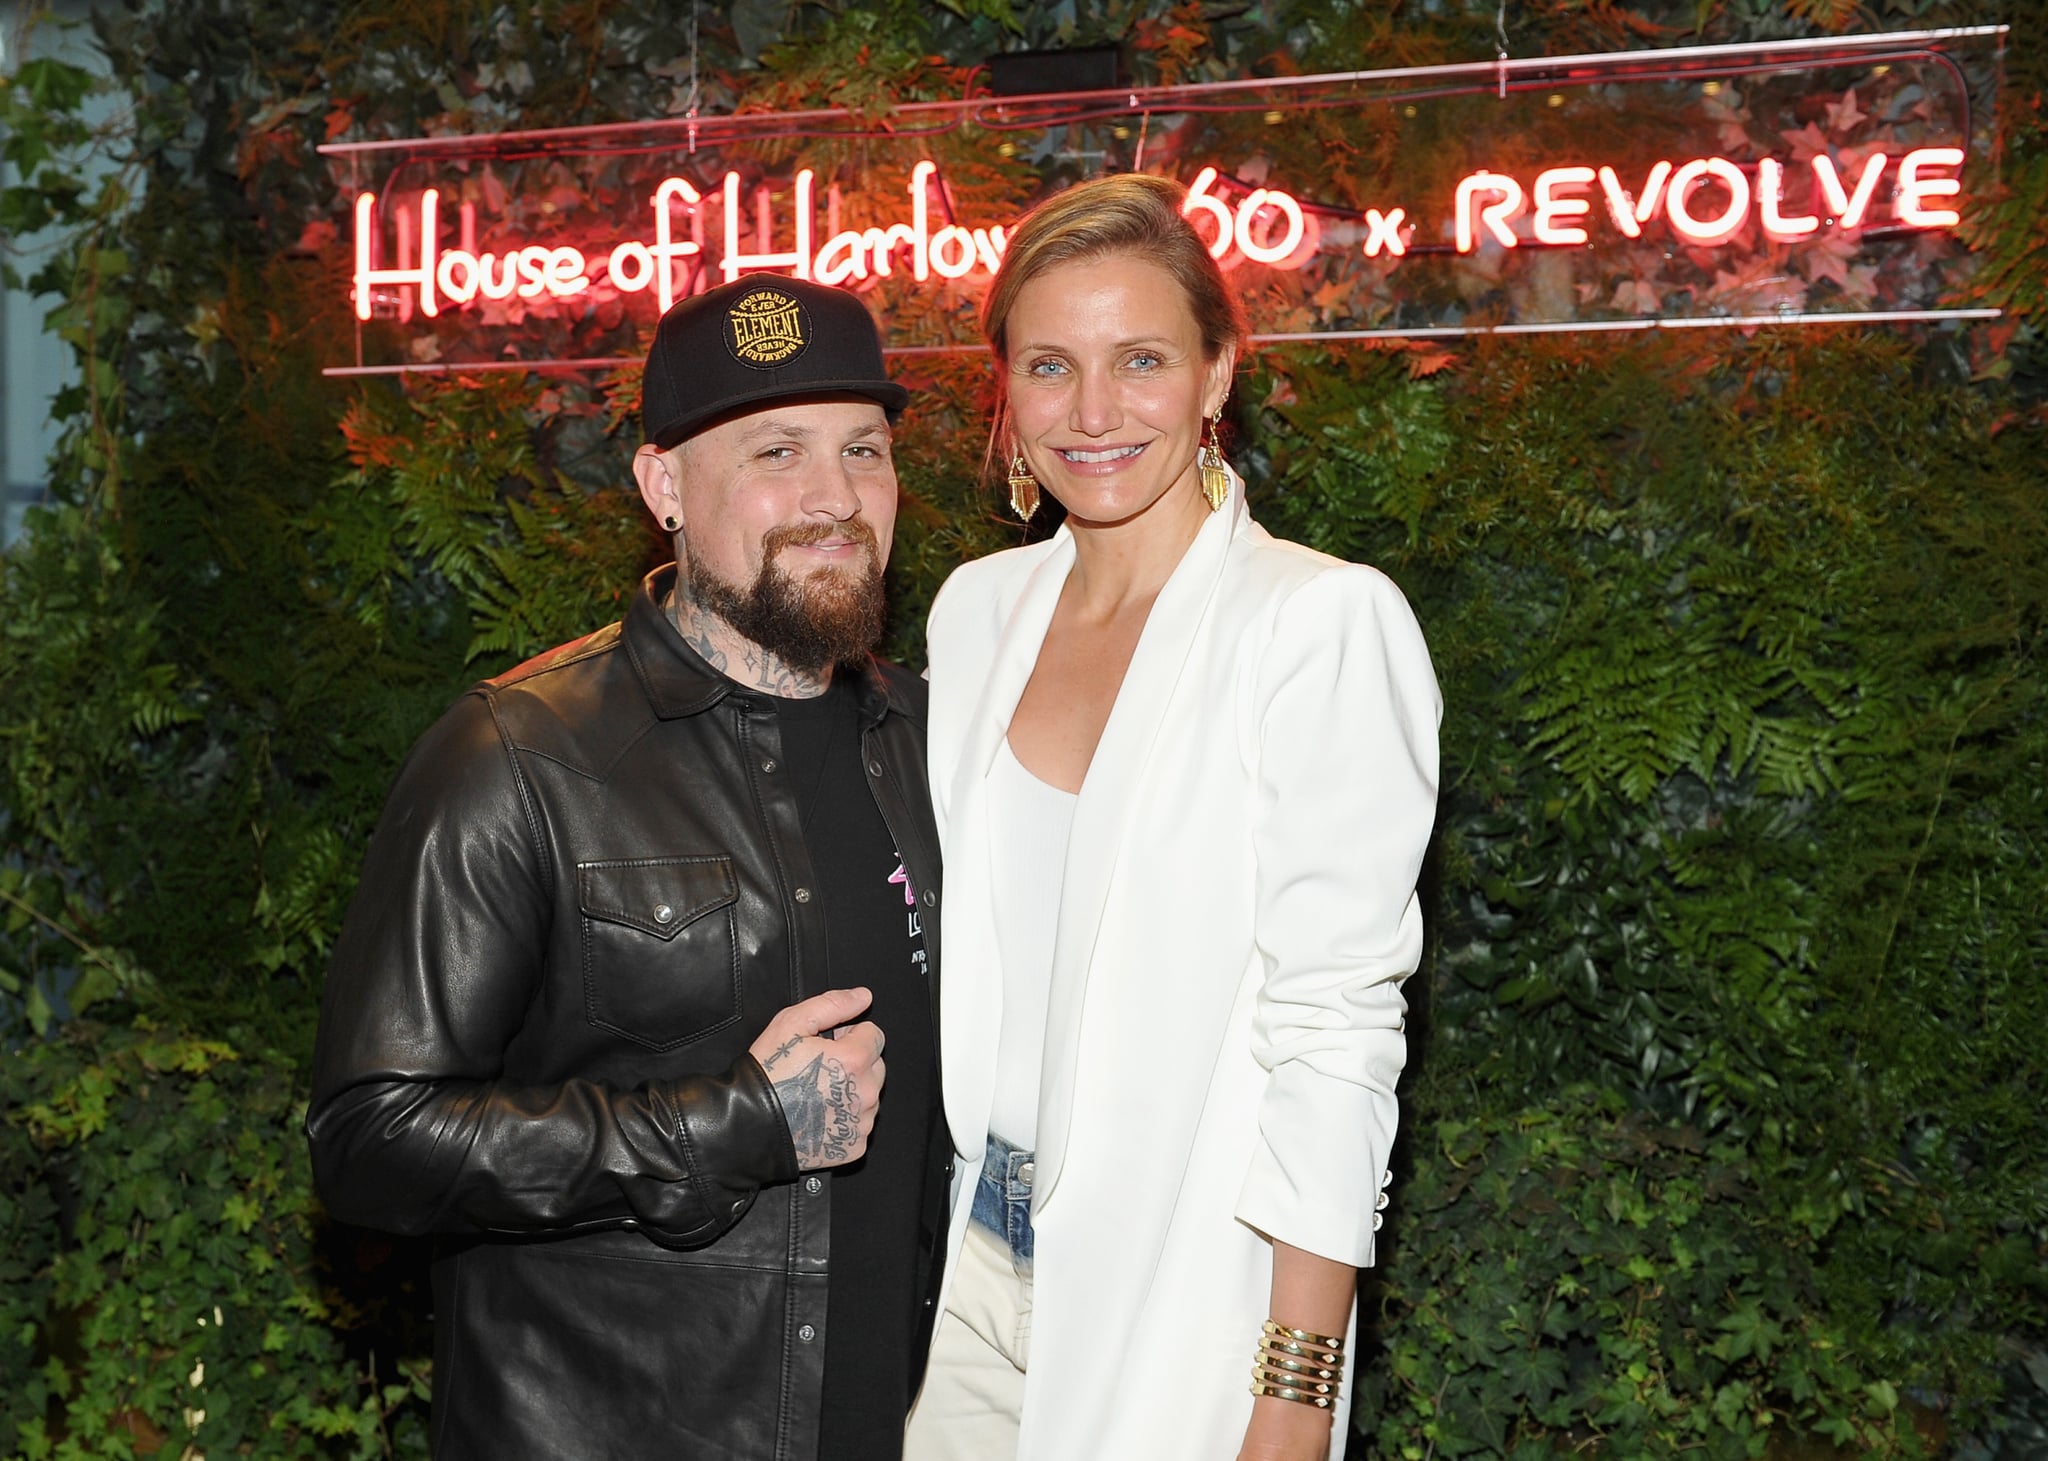 LOS ANGELES, CA - JUNE 02:  Guitarist Benji Madden and actress Cameron Diaz attend House of Harlow 1960 x REVOLVE on June 2, 2016 in Los Angeles, California.  (Photo by Donato Sardella/Getty Images for REVOLVE)